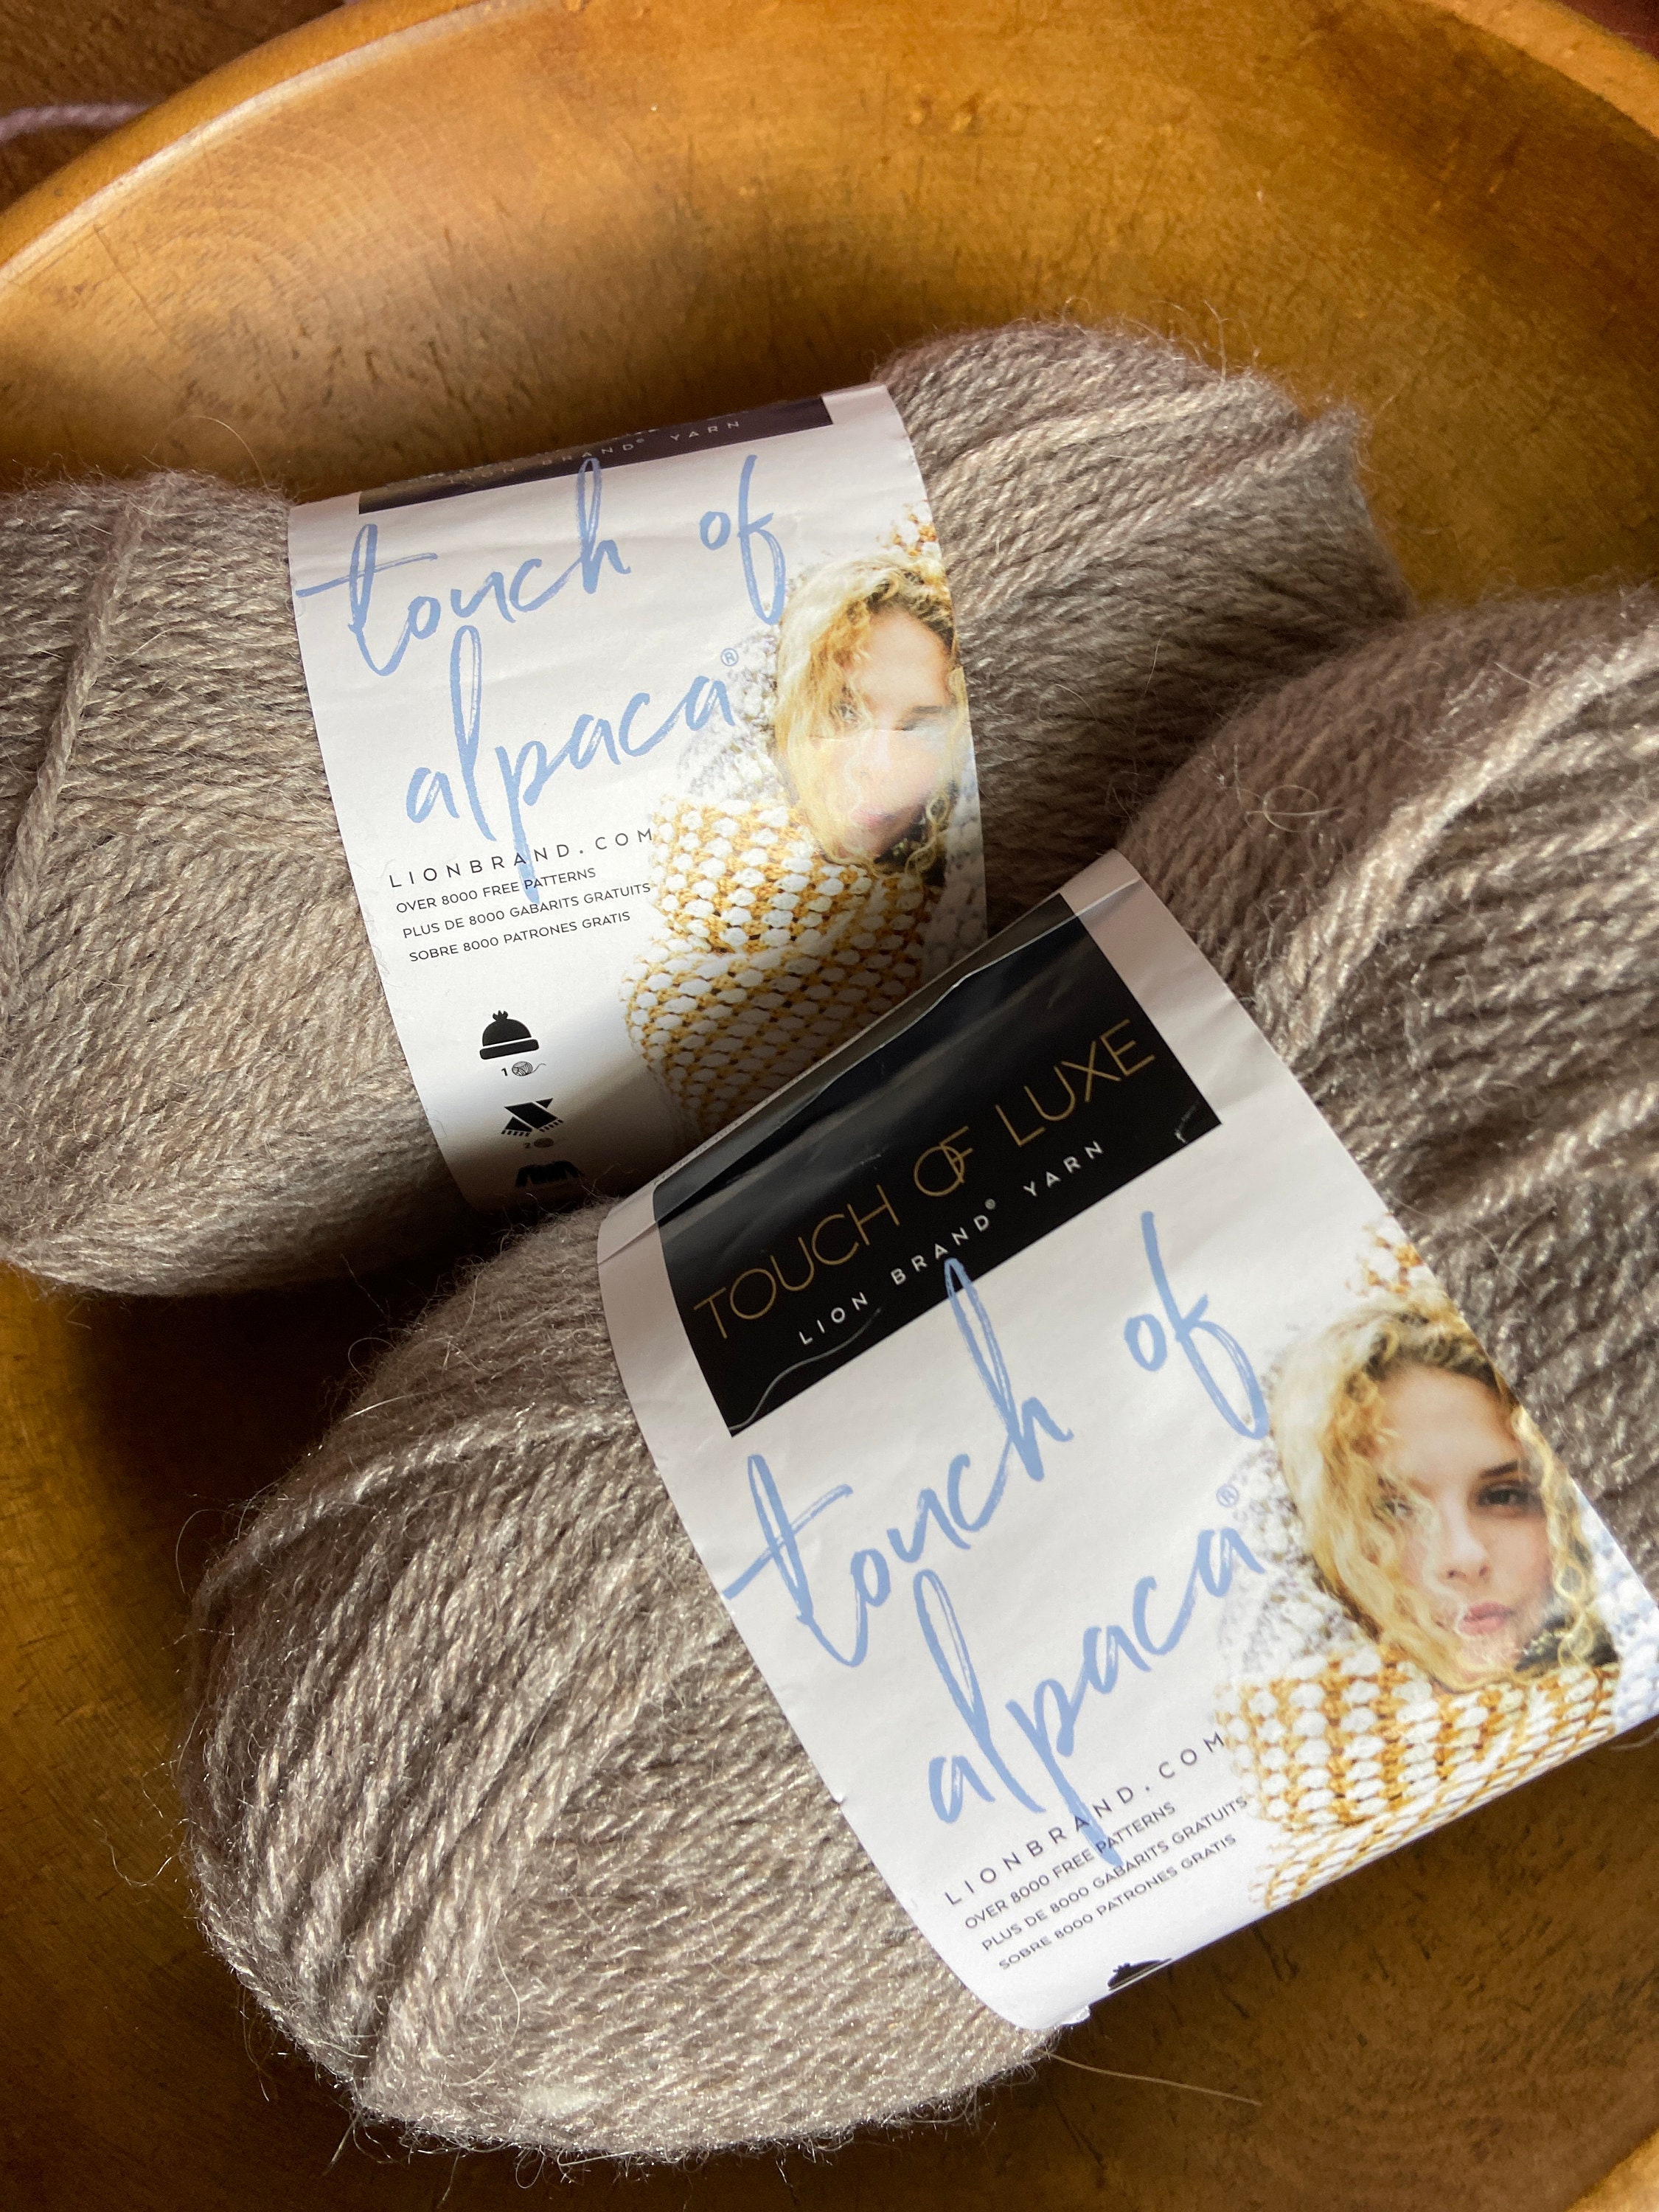 Lion Brand Touch of Alpaca Yarn - Charcoal